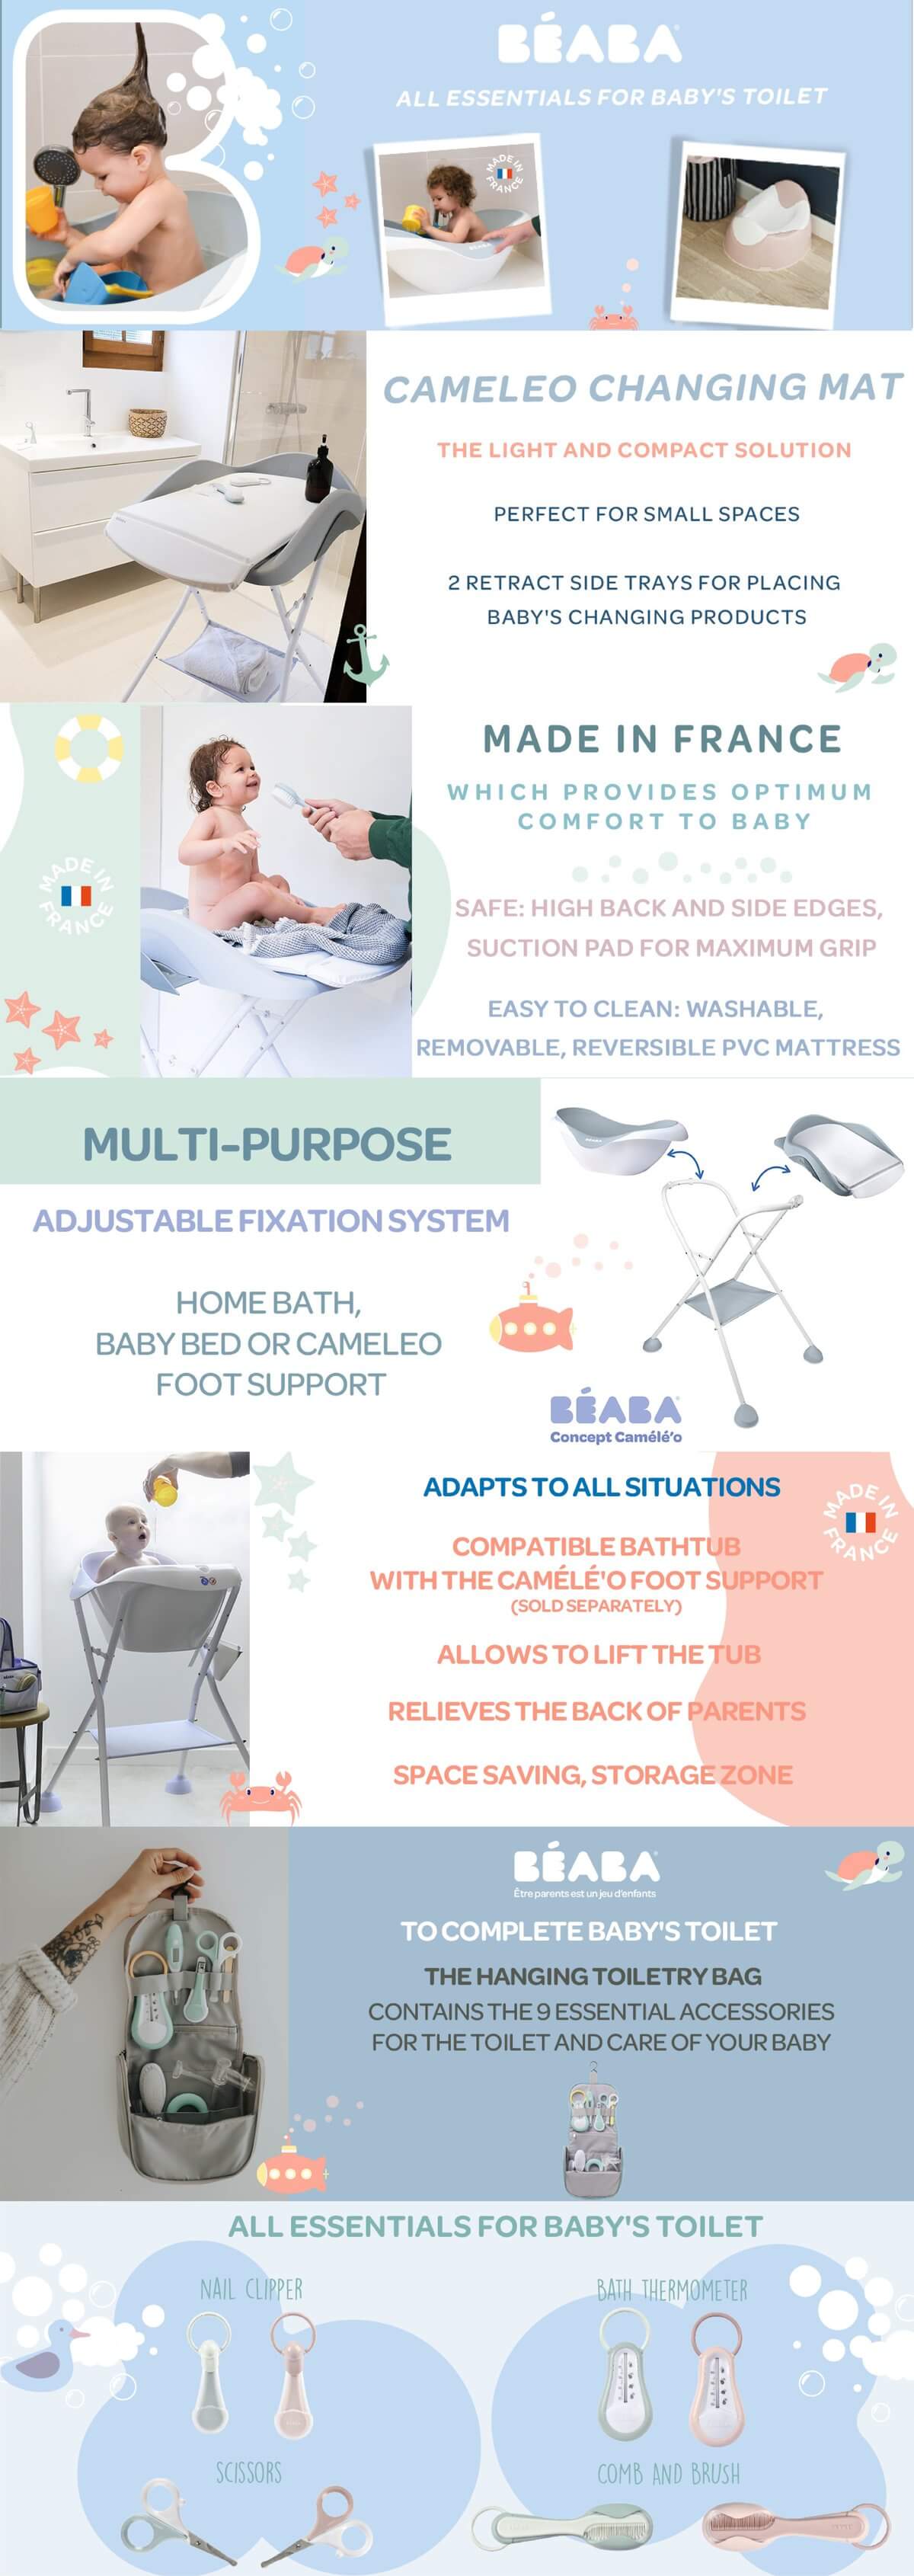 Beaba Cameleo Baby Bath Foot Support (Stand Only)